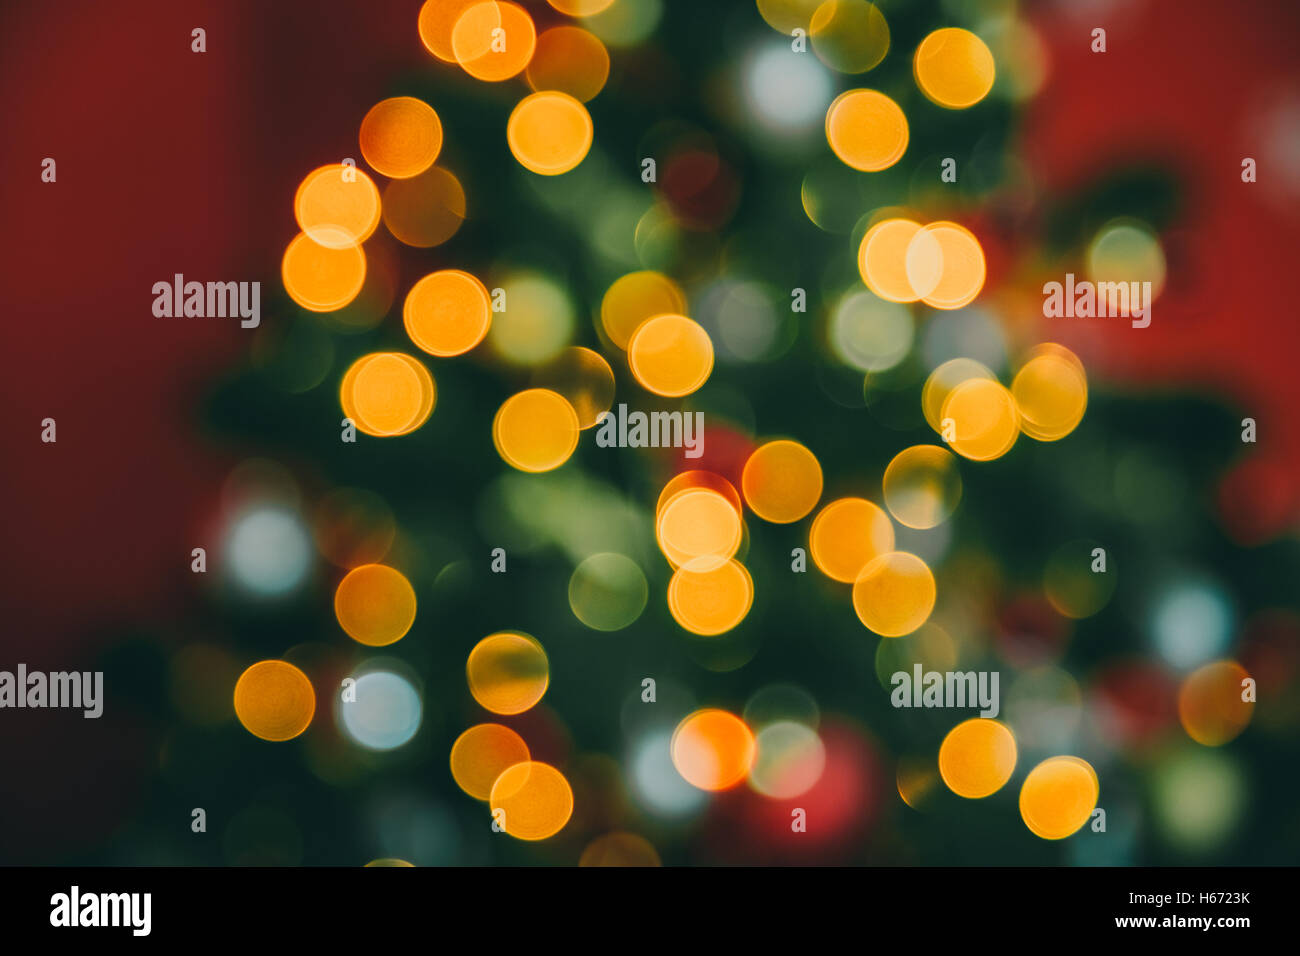 Defocused background Living room with christmas tree Stock Photo